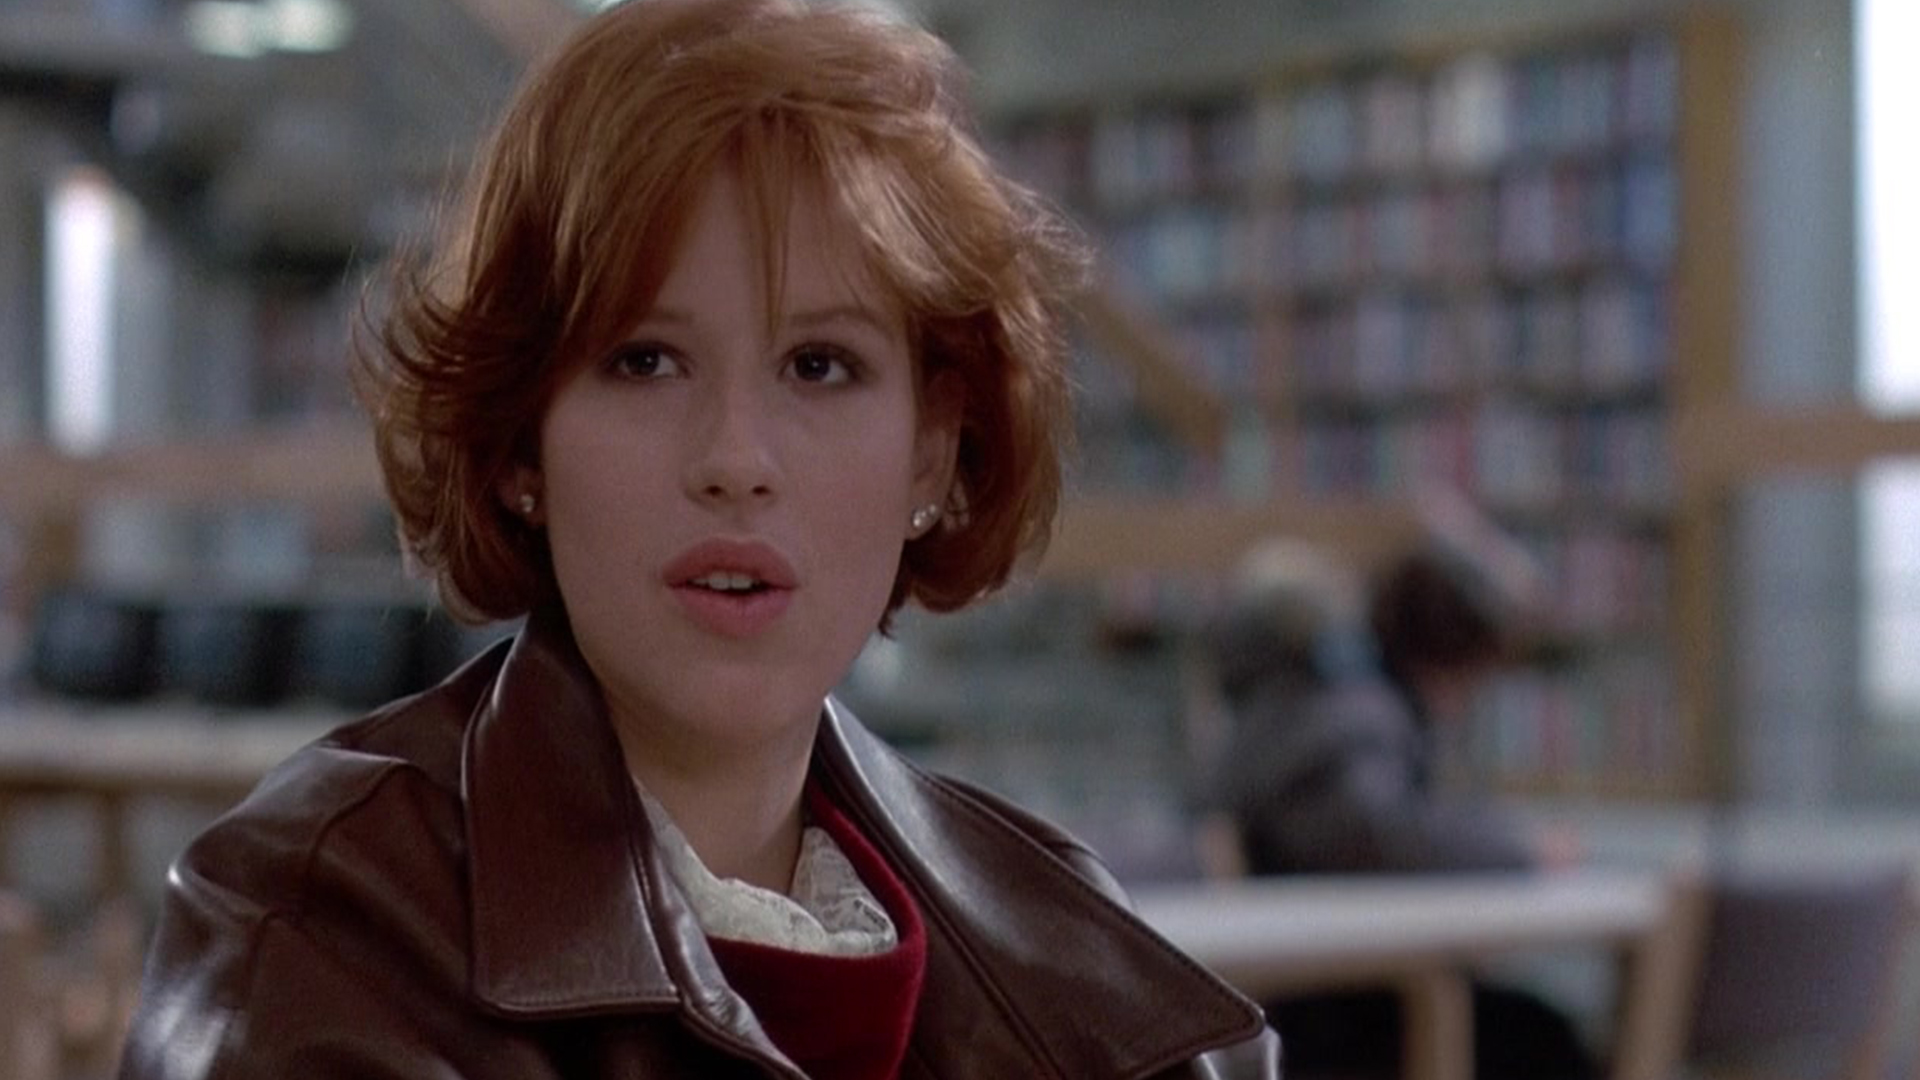 Claire Standish Molly Ringwald The Breakfast Club Wallpaper Resolution1920x1080 Id536227 